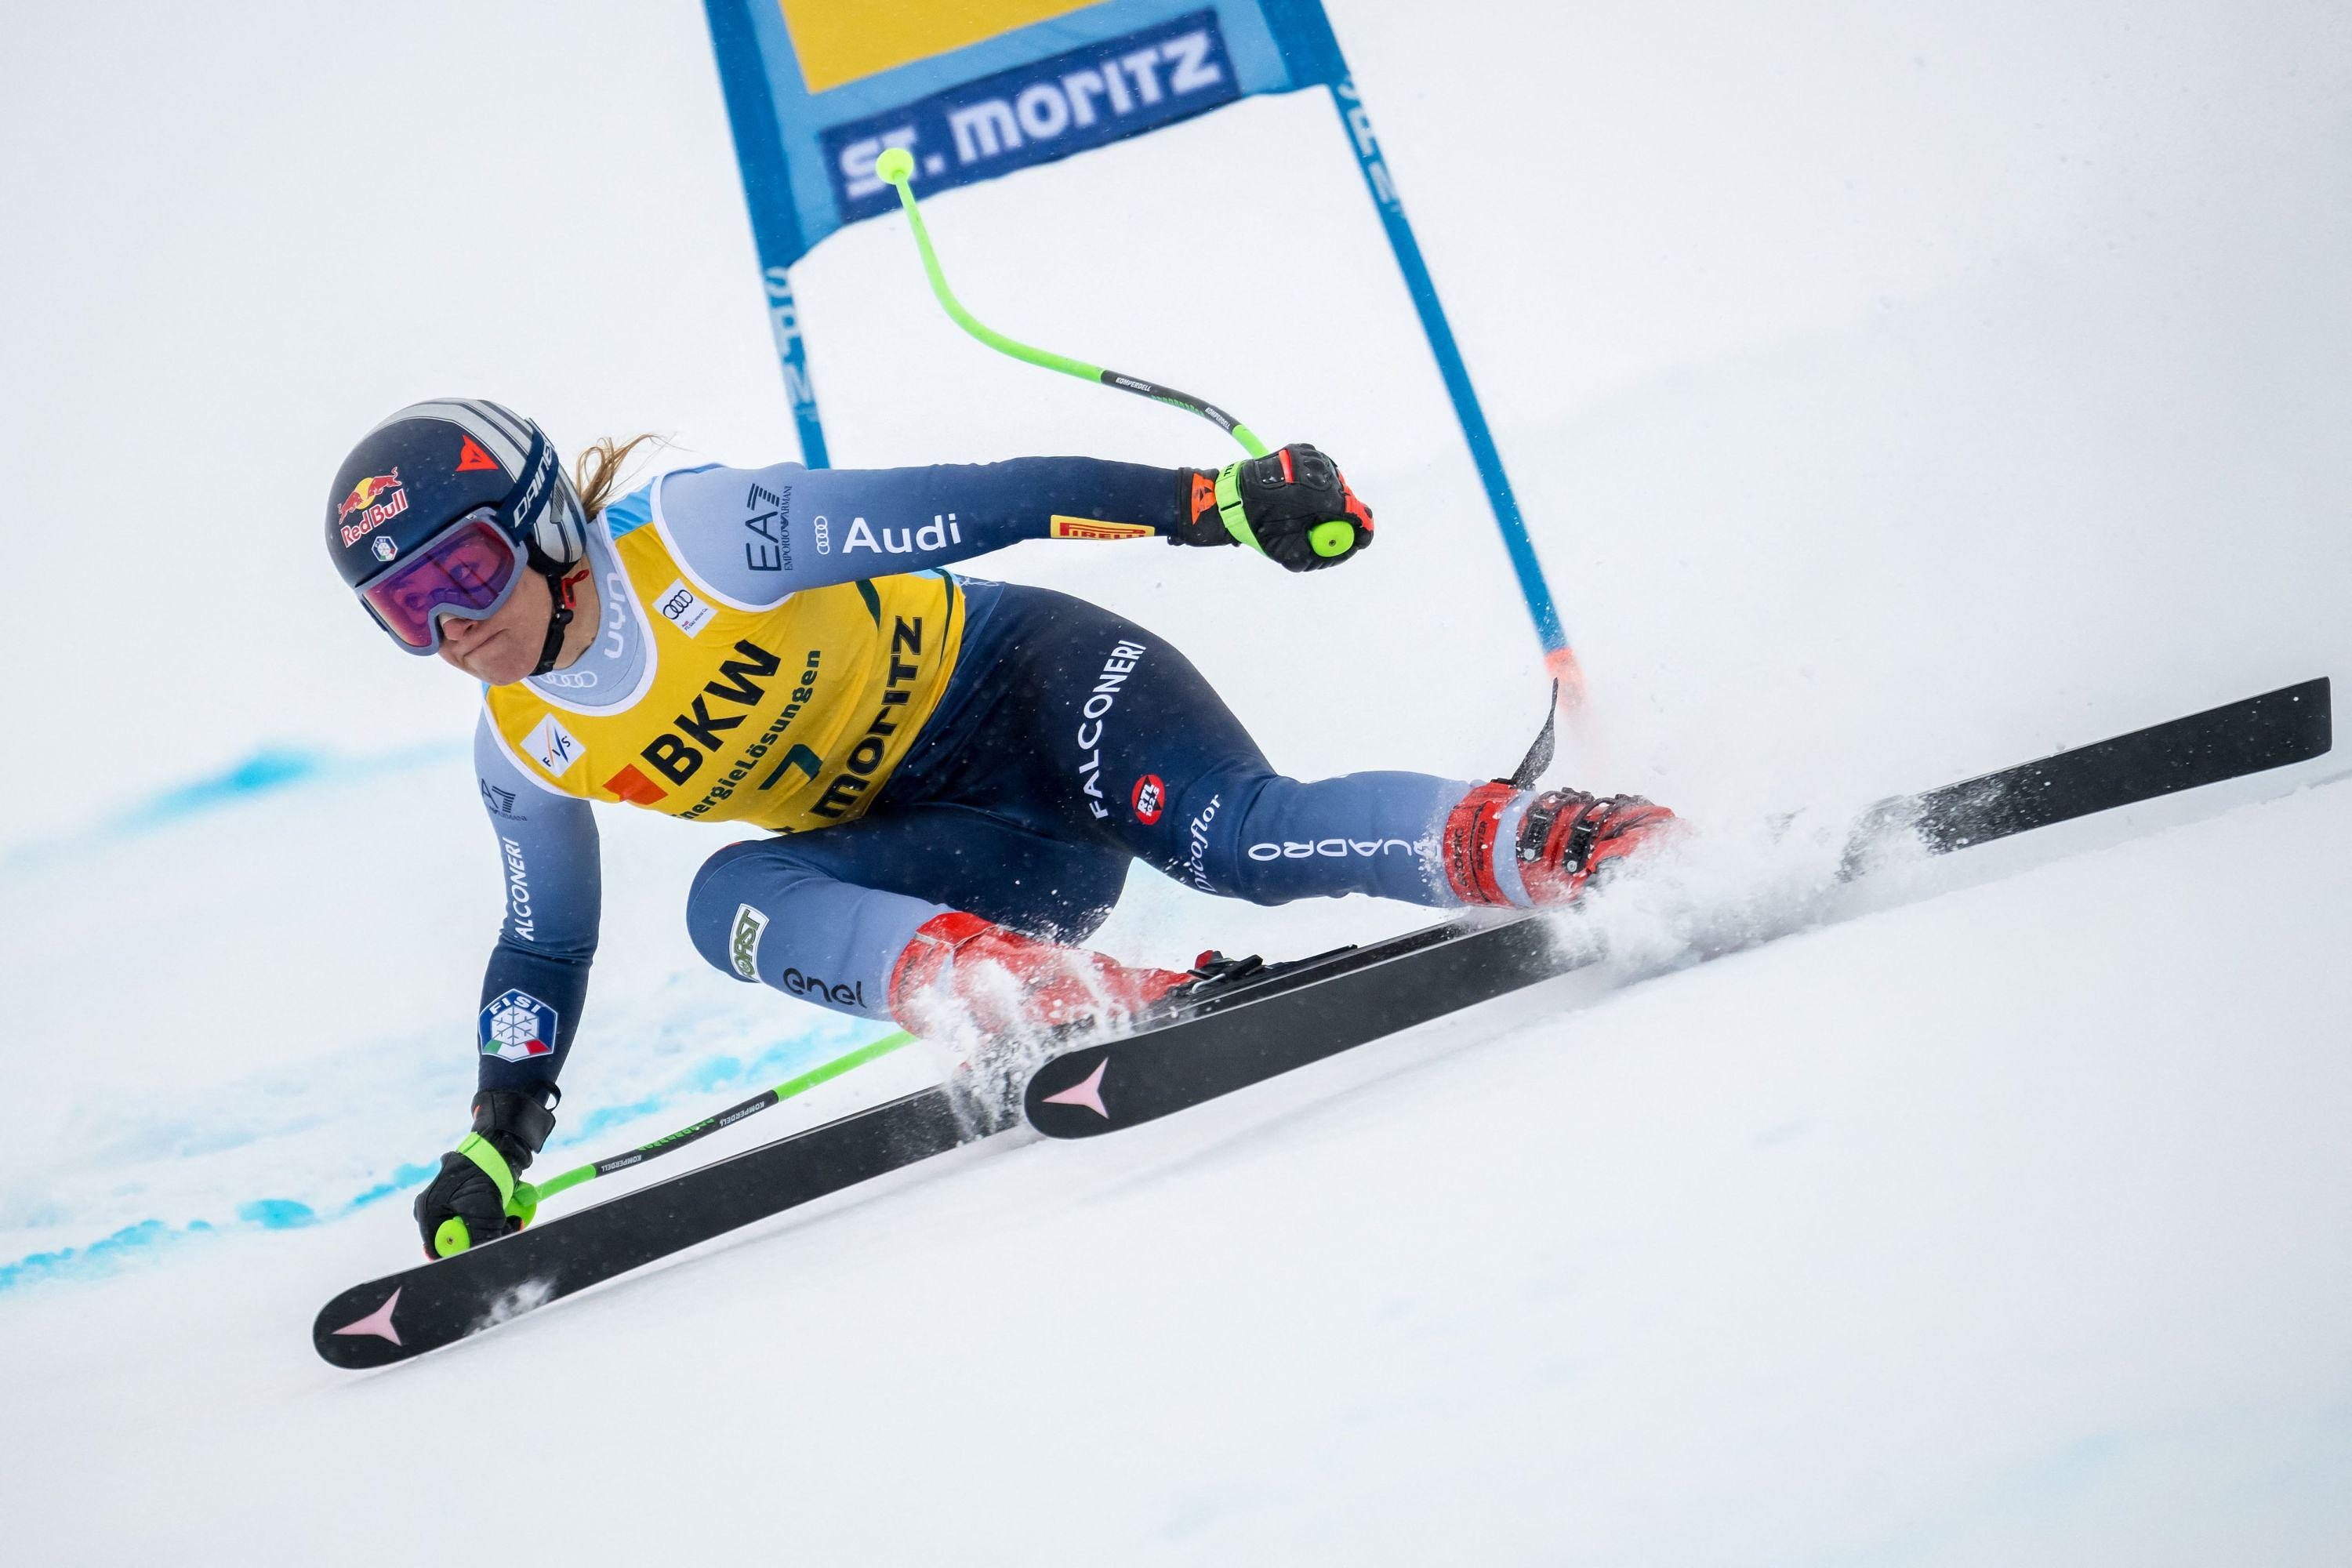 Alpine skiing: in difficult conditions, Goggia wins the first super-G in St. Moritz